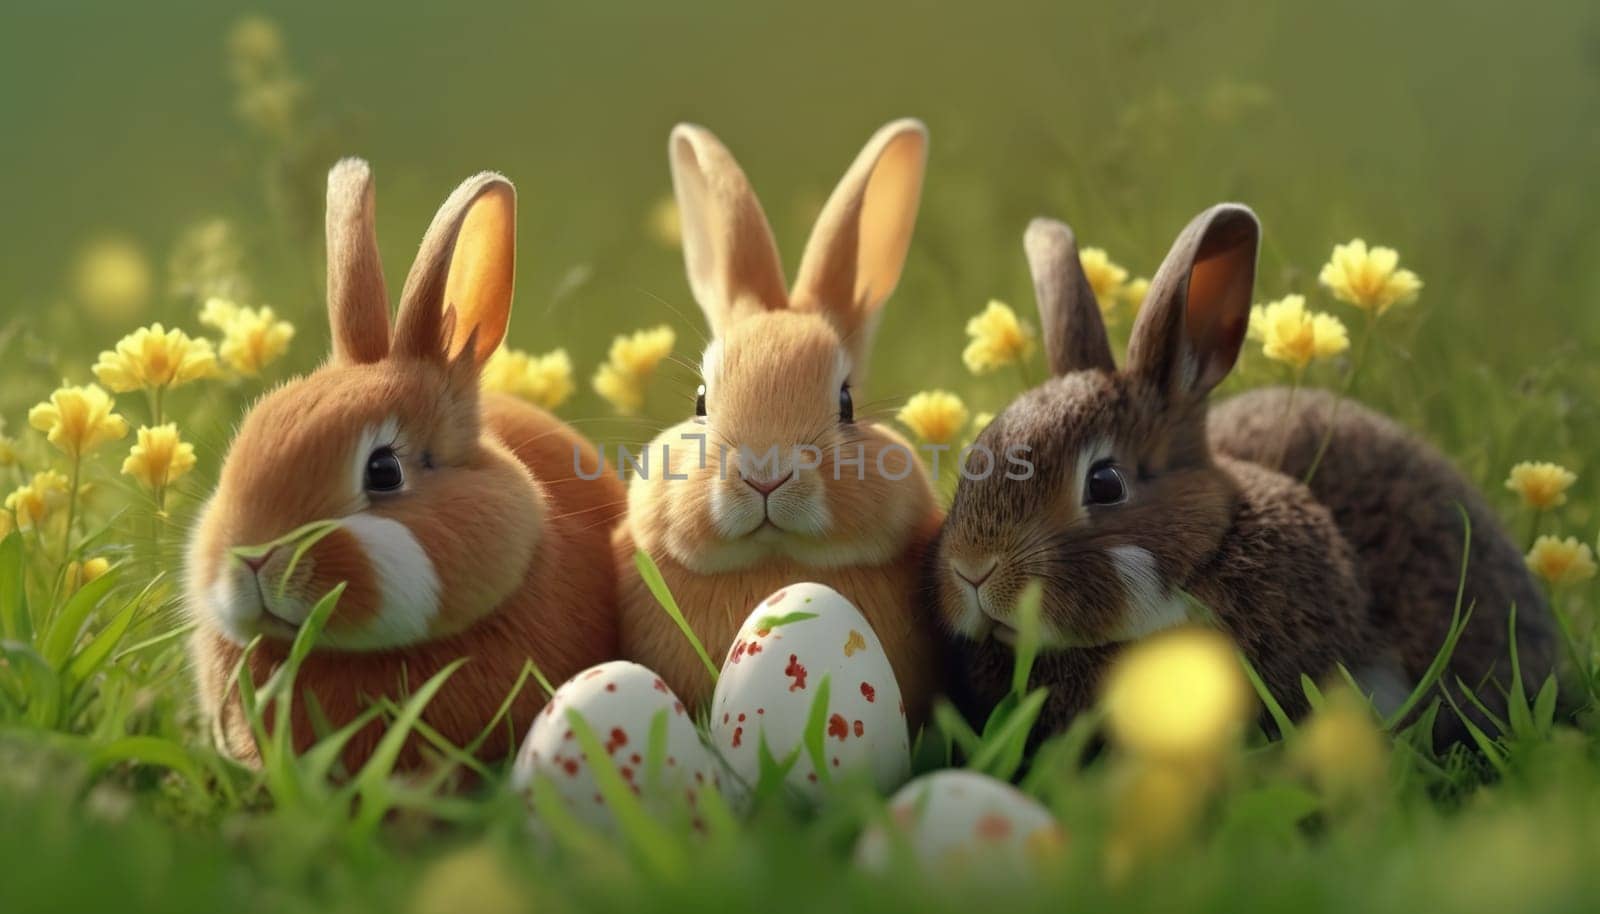 rio of bunnies amid grass and flowers with speckled Easter eggs in the foreground by chrisroll